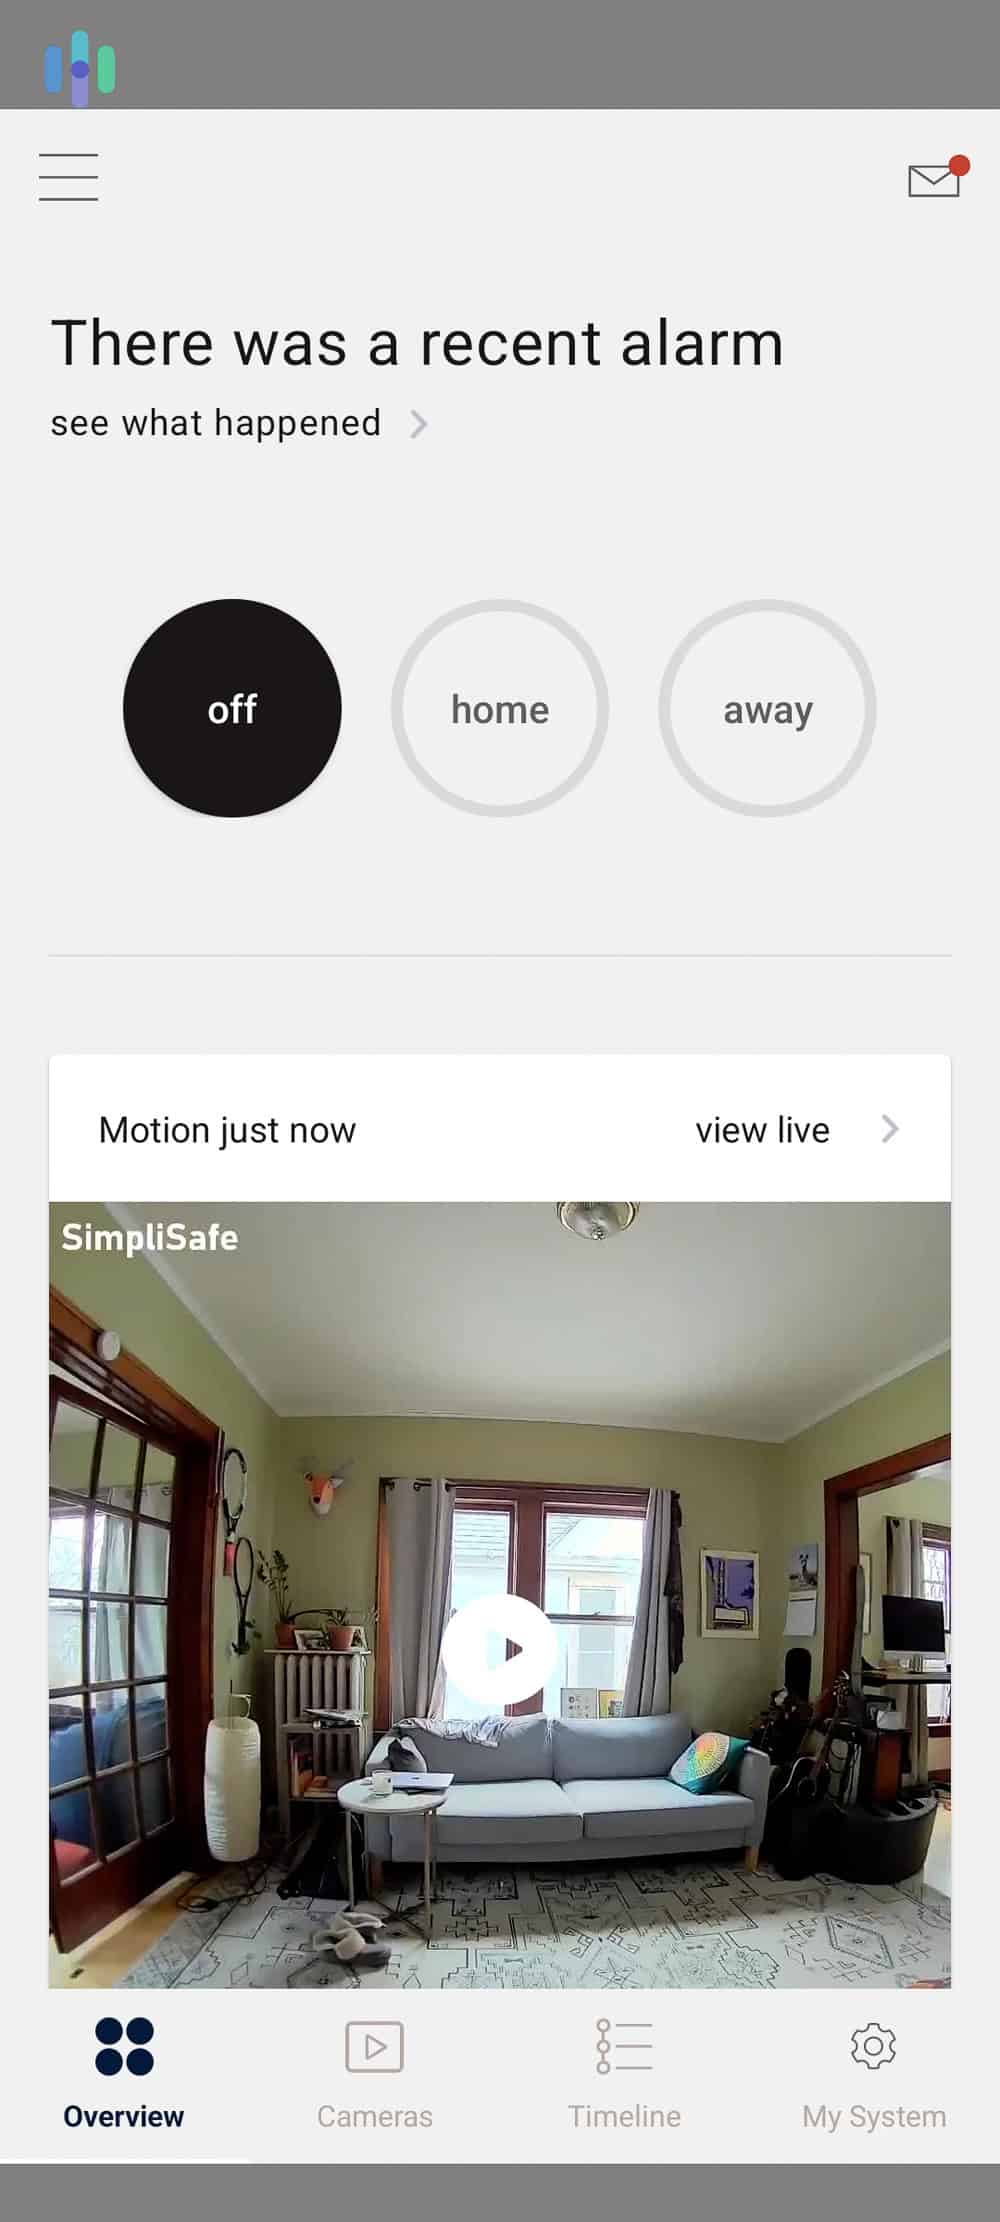 SimpliSafe app's overview page